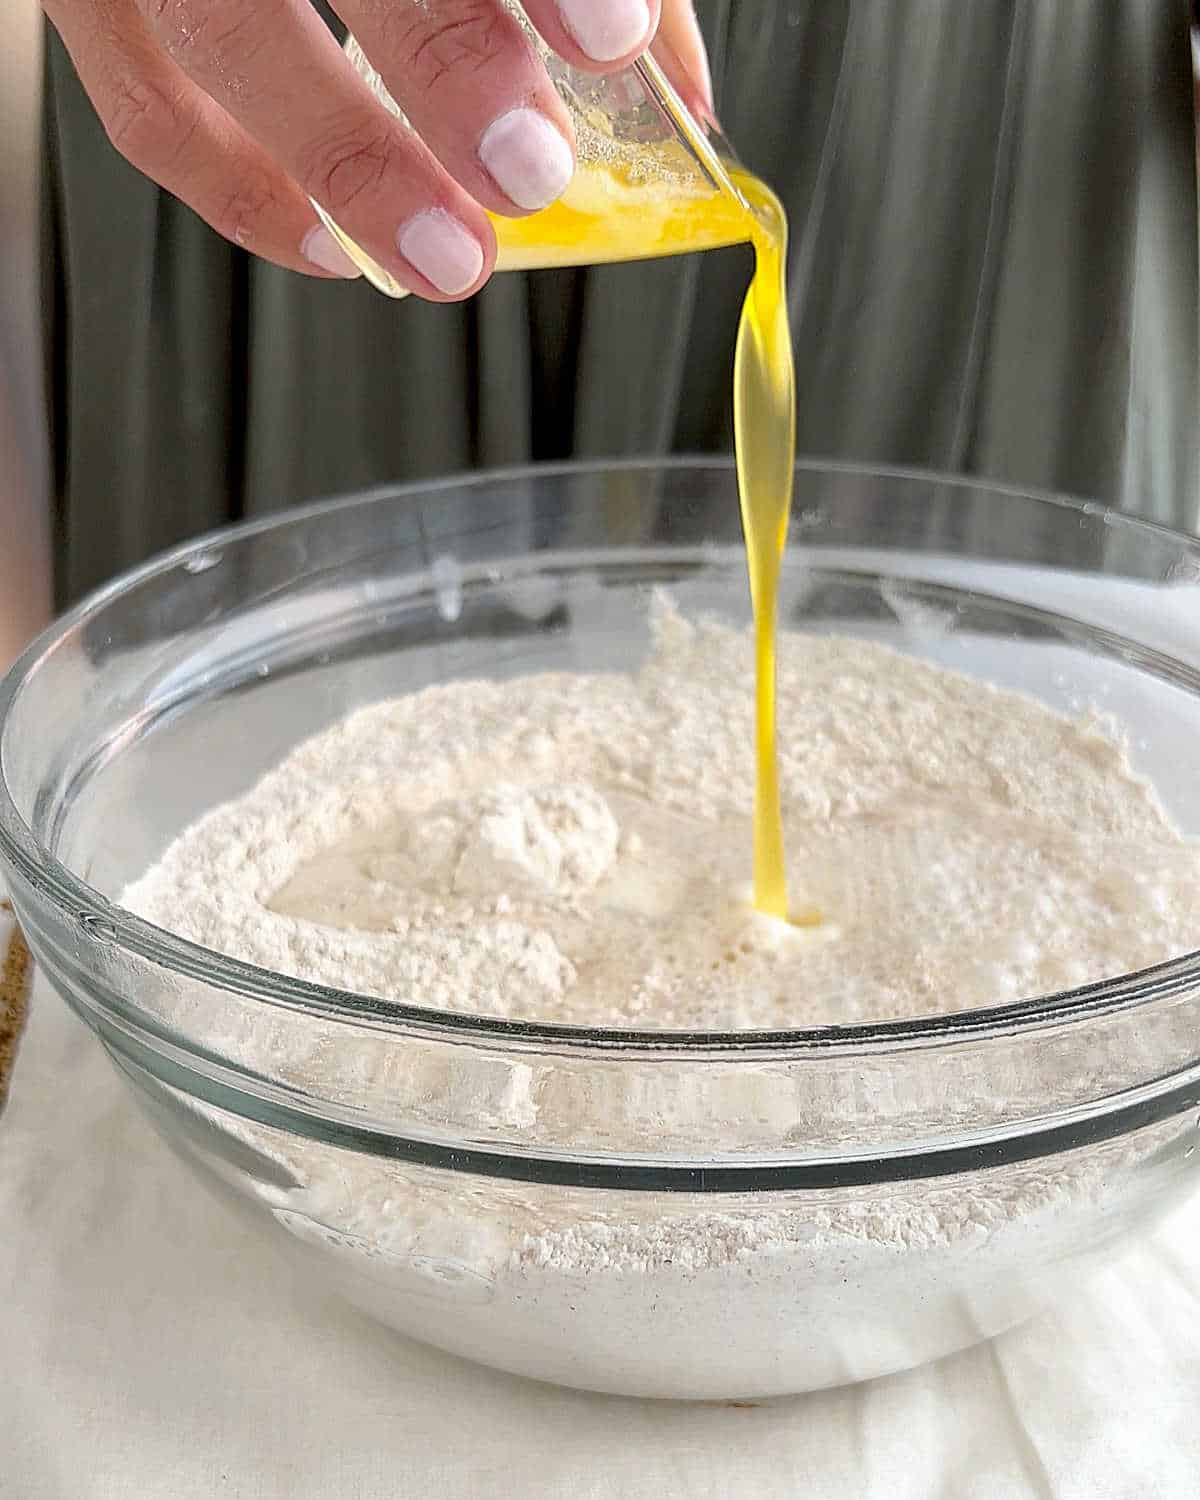 Hands adding melted butter to whole wheat mixture in a glass bowl. White surface, green background.